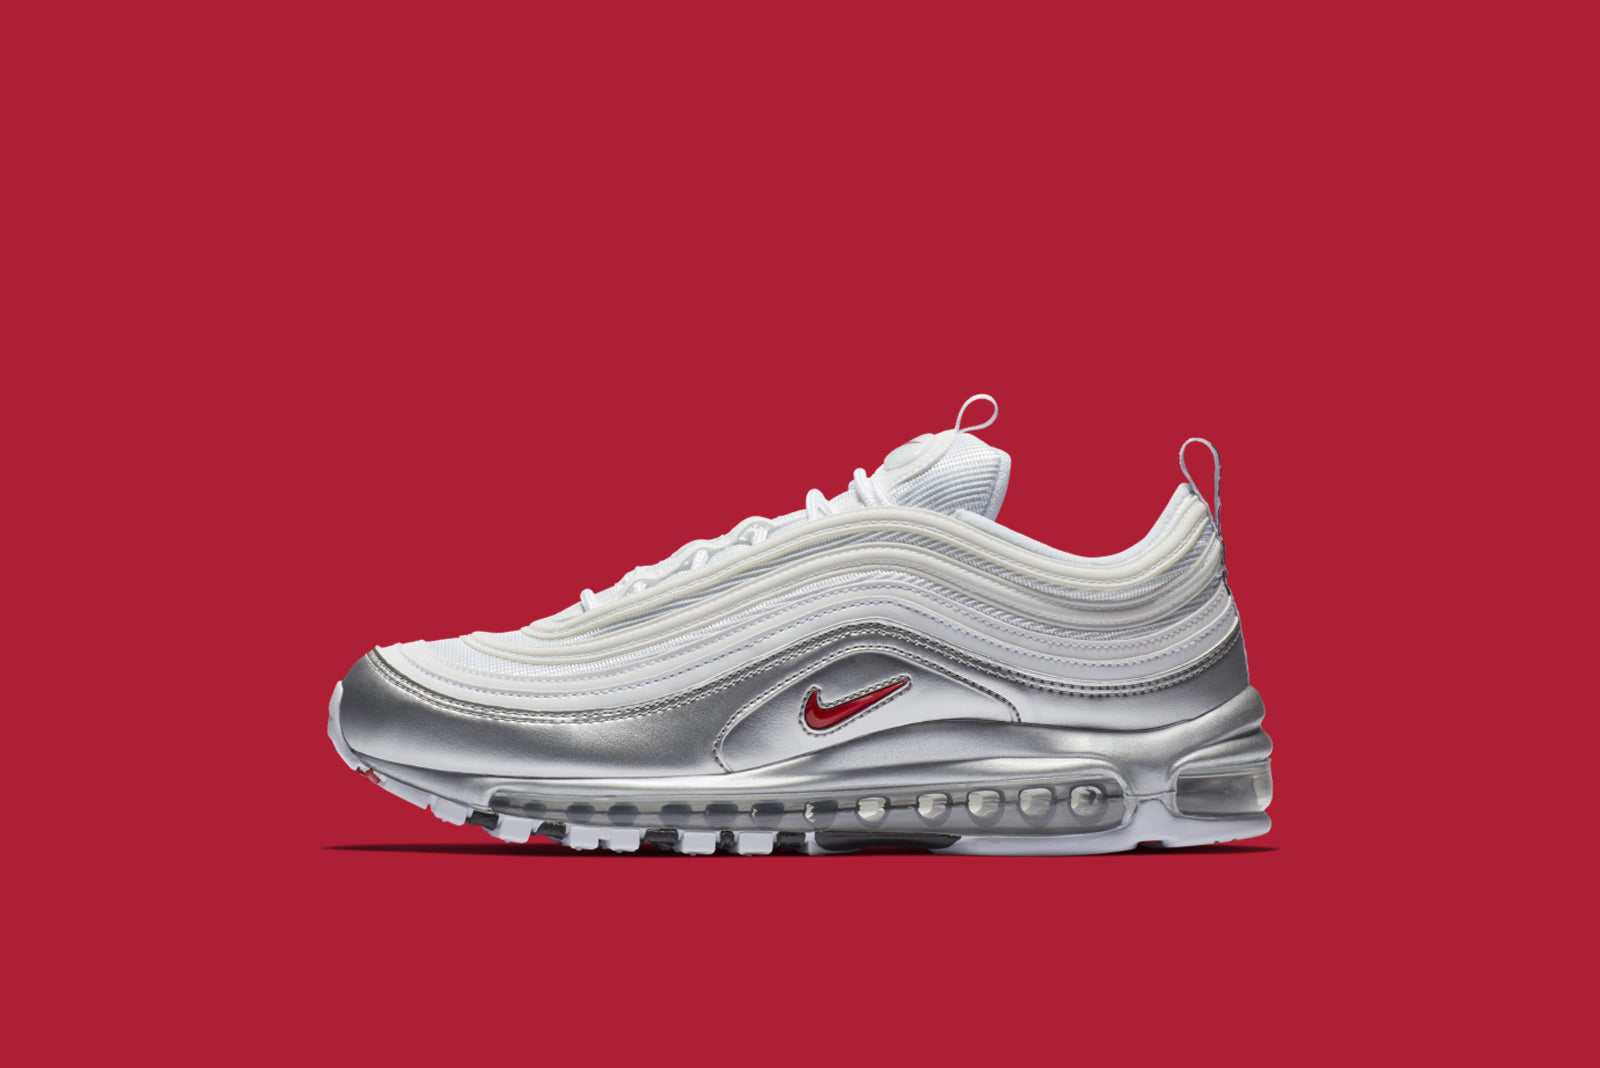 Solid Nike Air Max 97 Athletic Shoes for Men for sale eBay